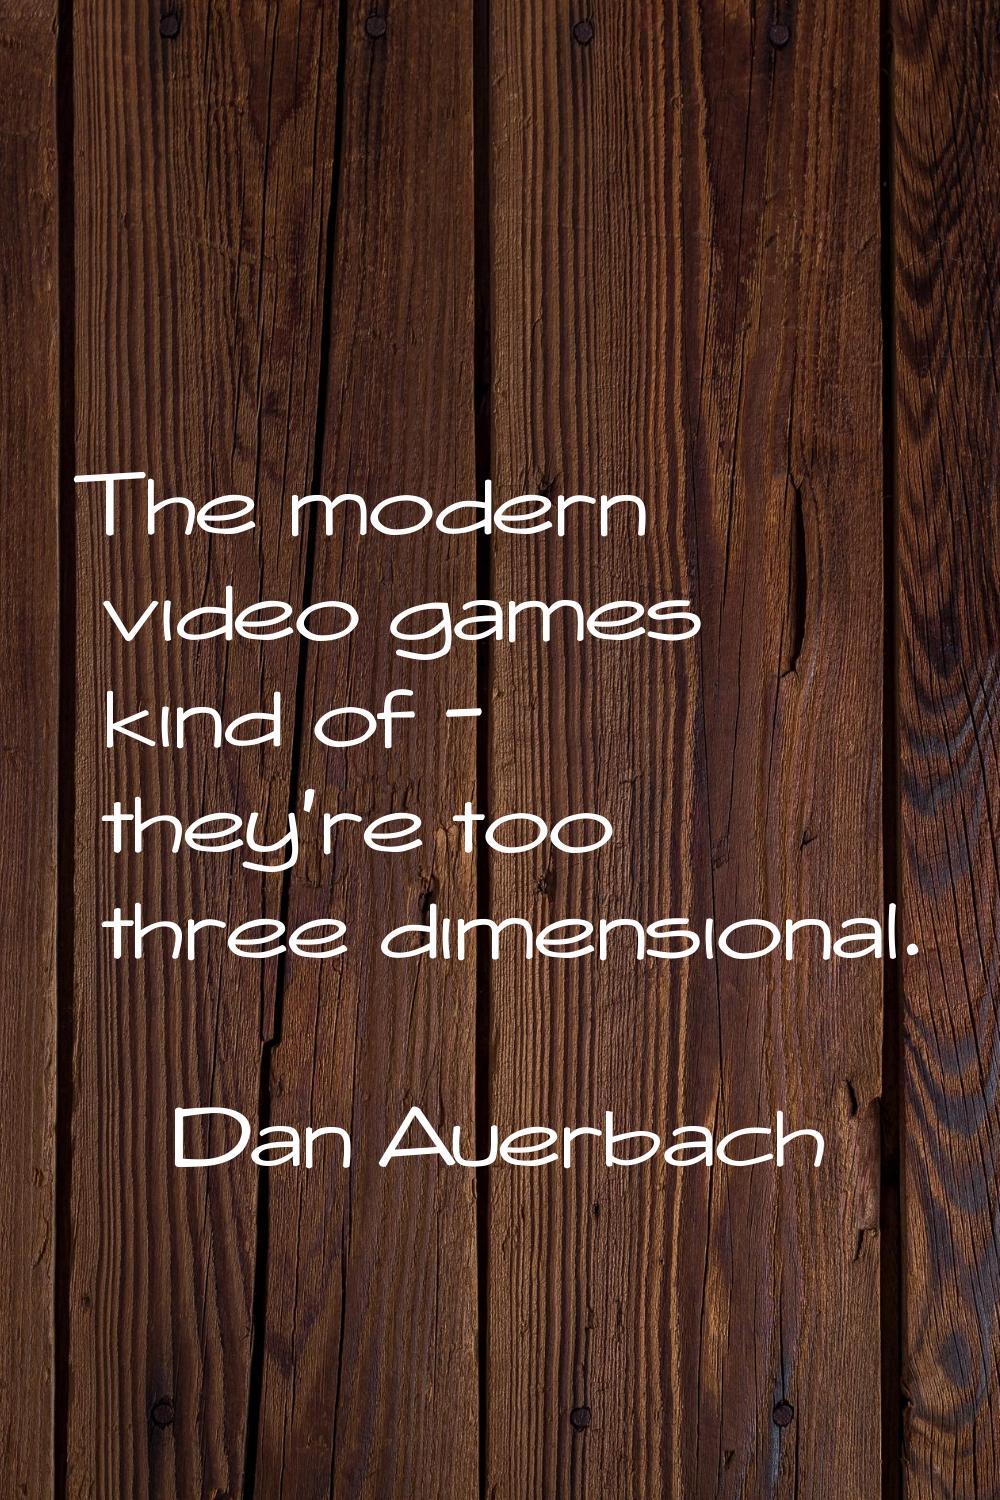 The modern video games kind of - they're too three dimensional.